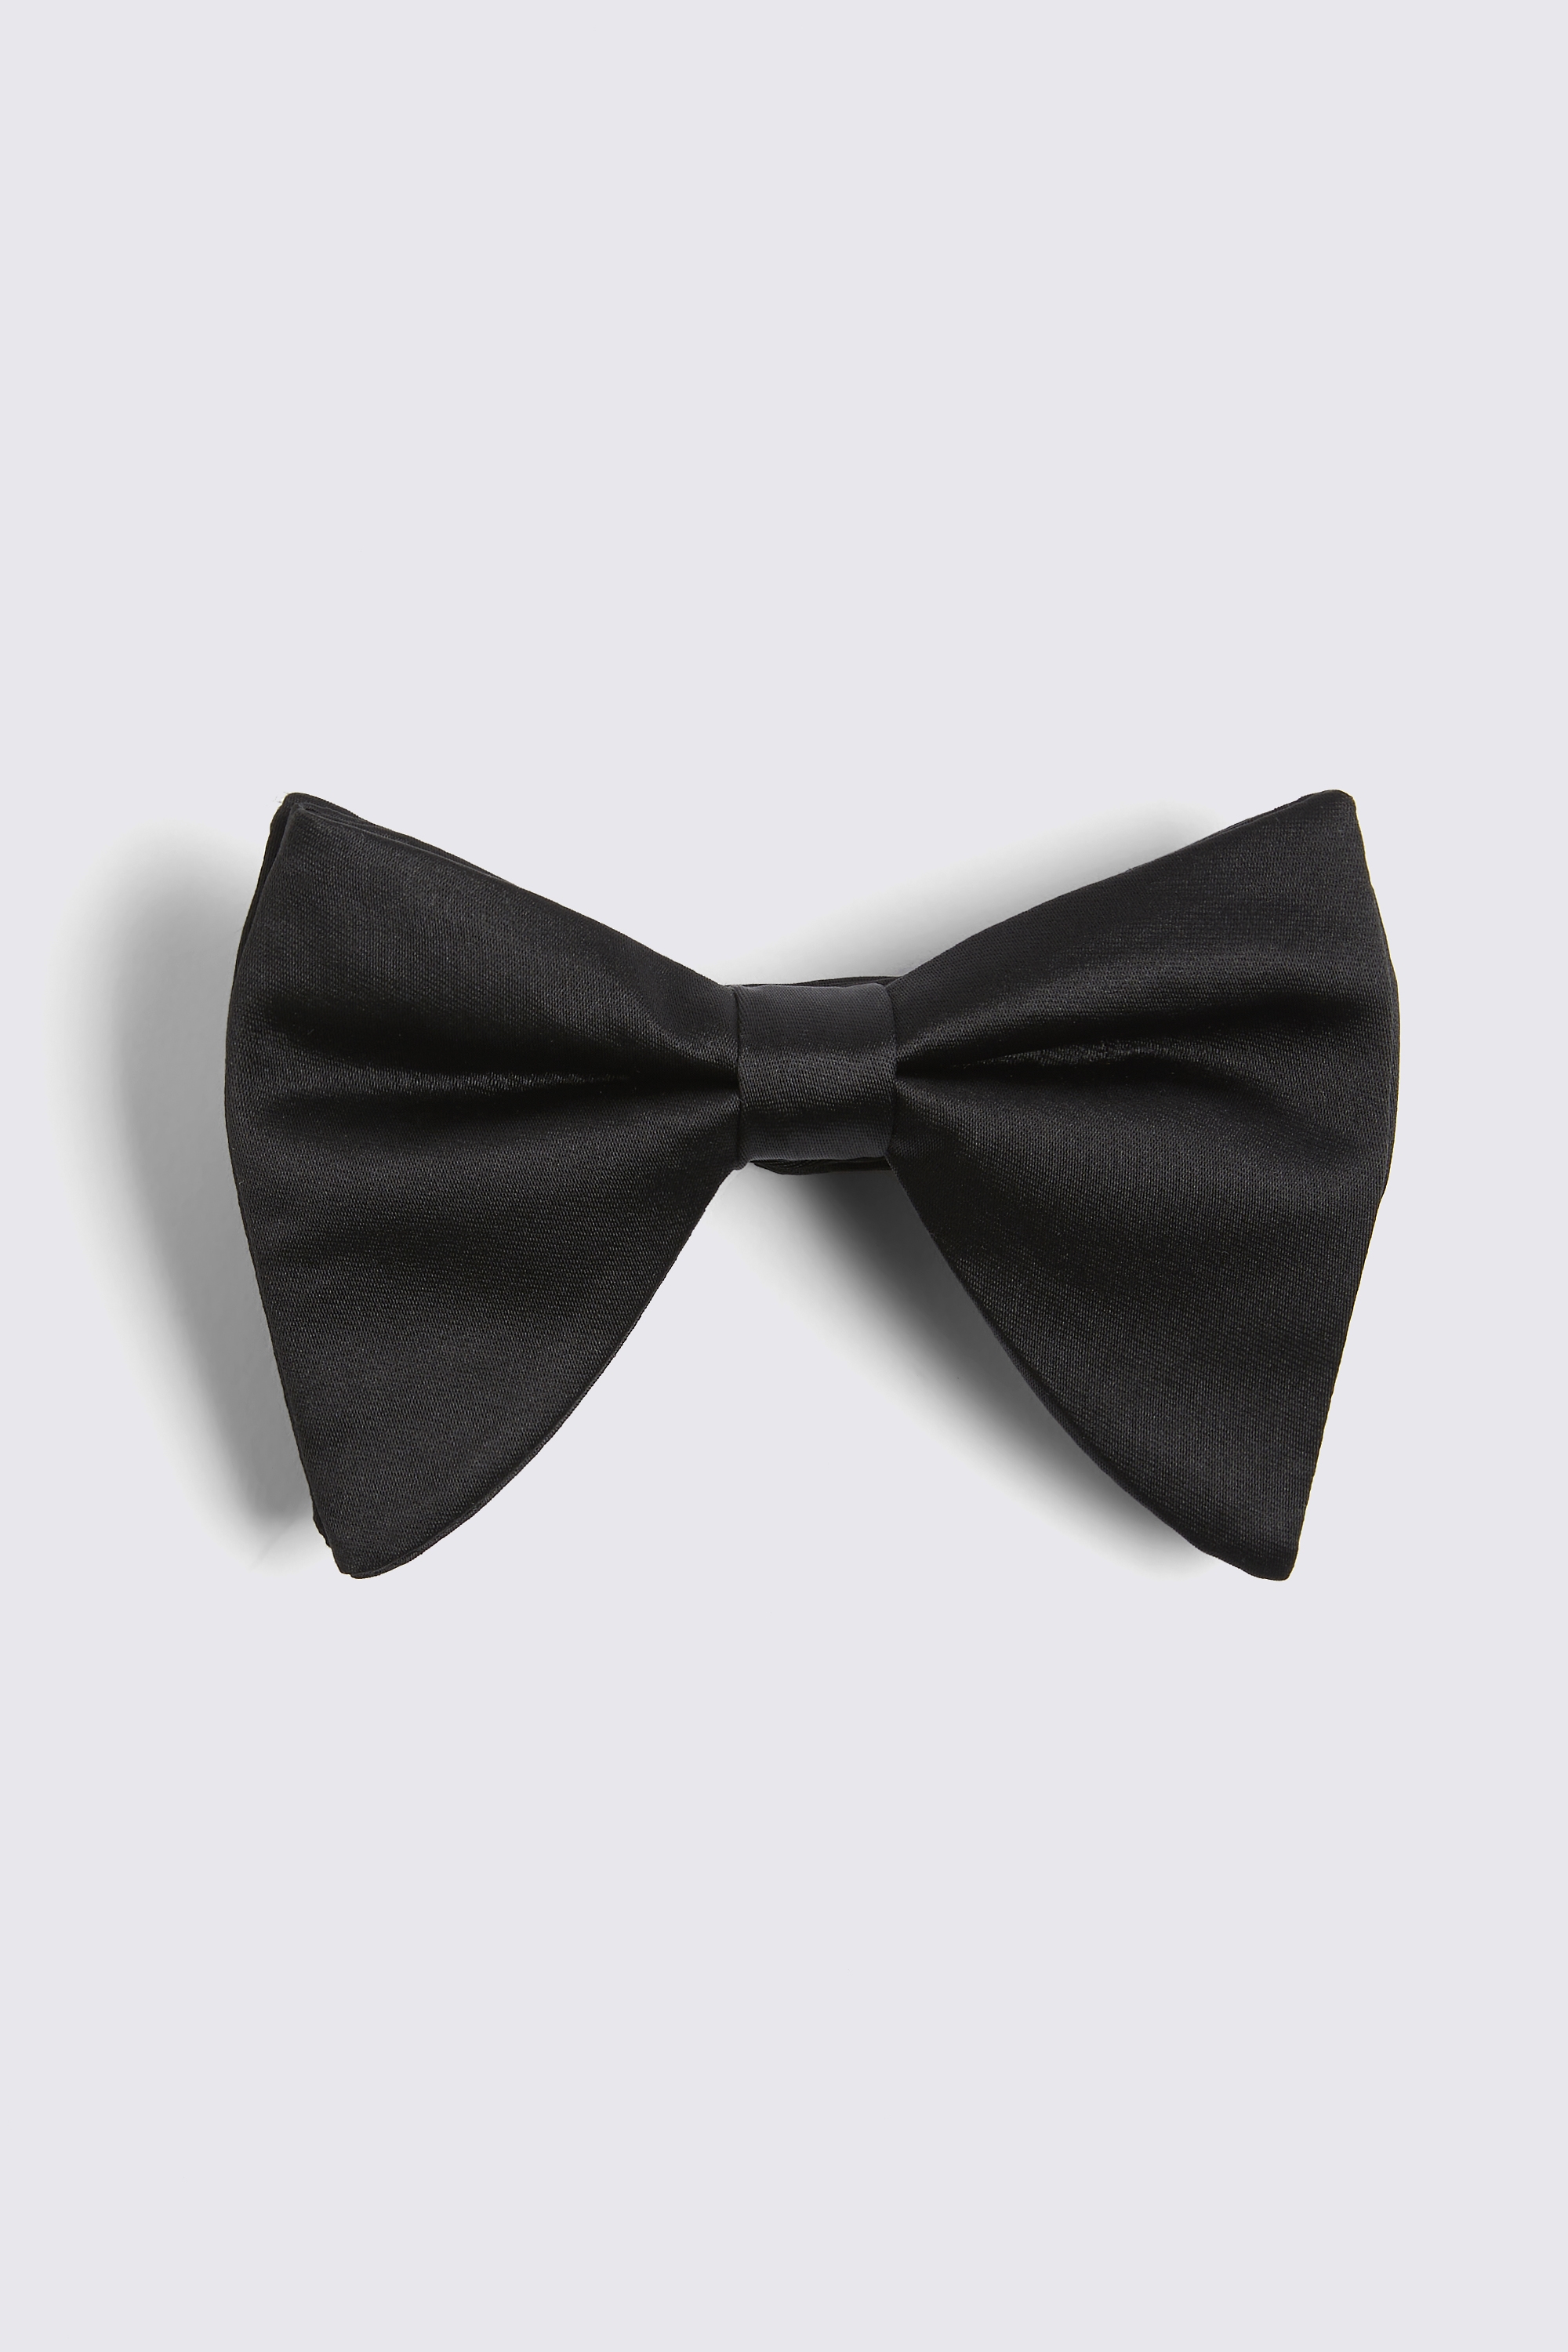 Black Oversized Bow Tie | Buy Online at Moss